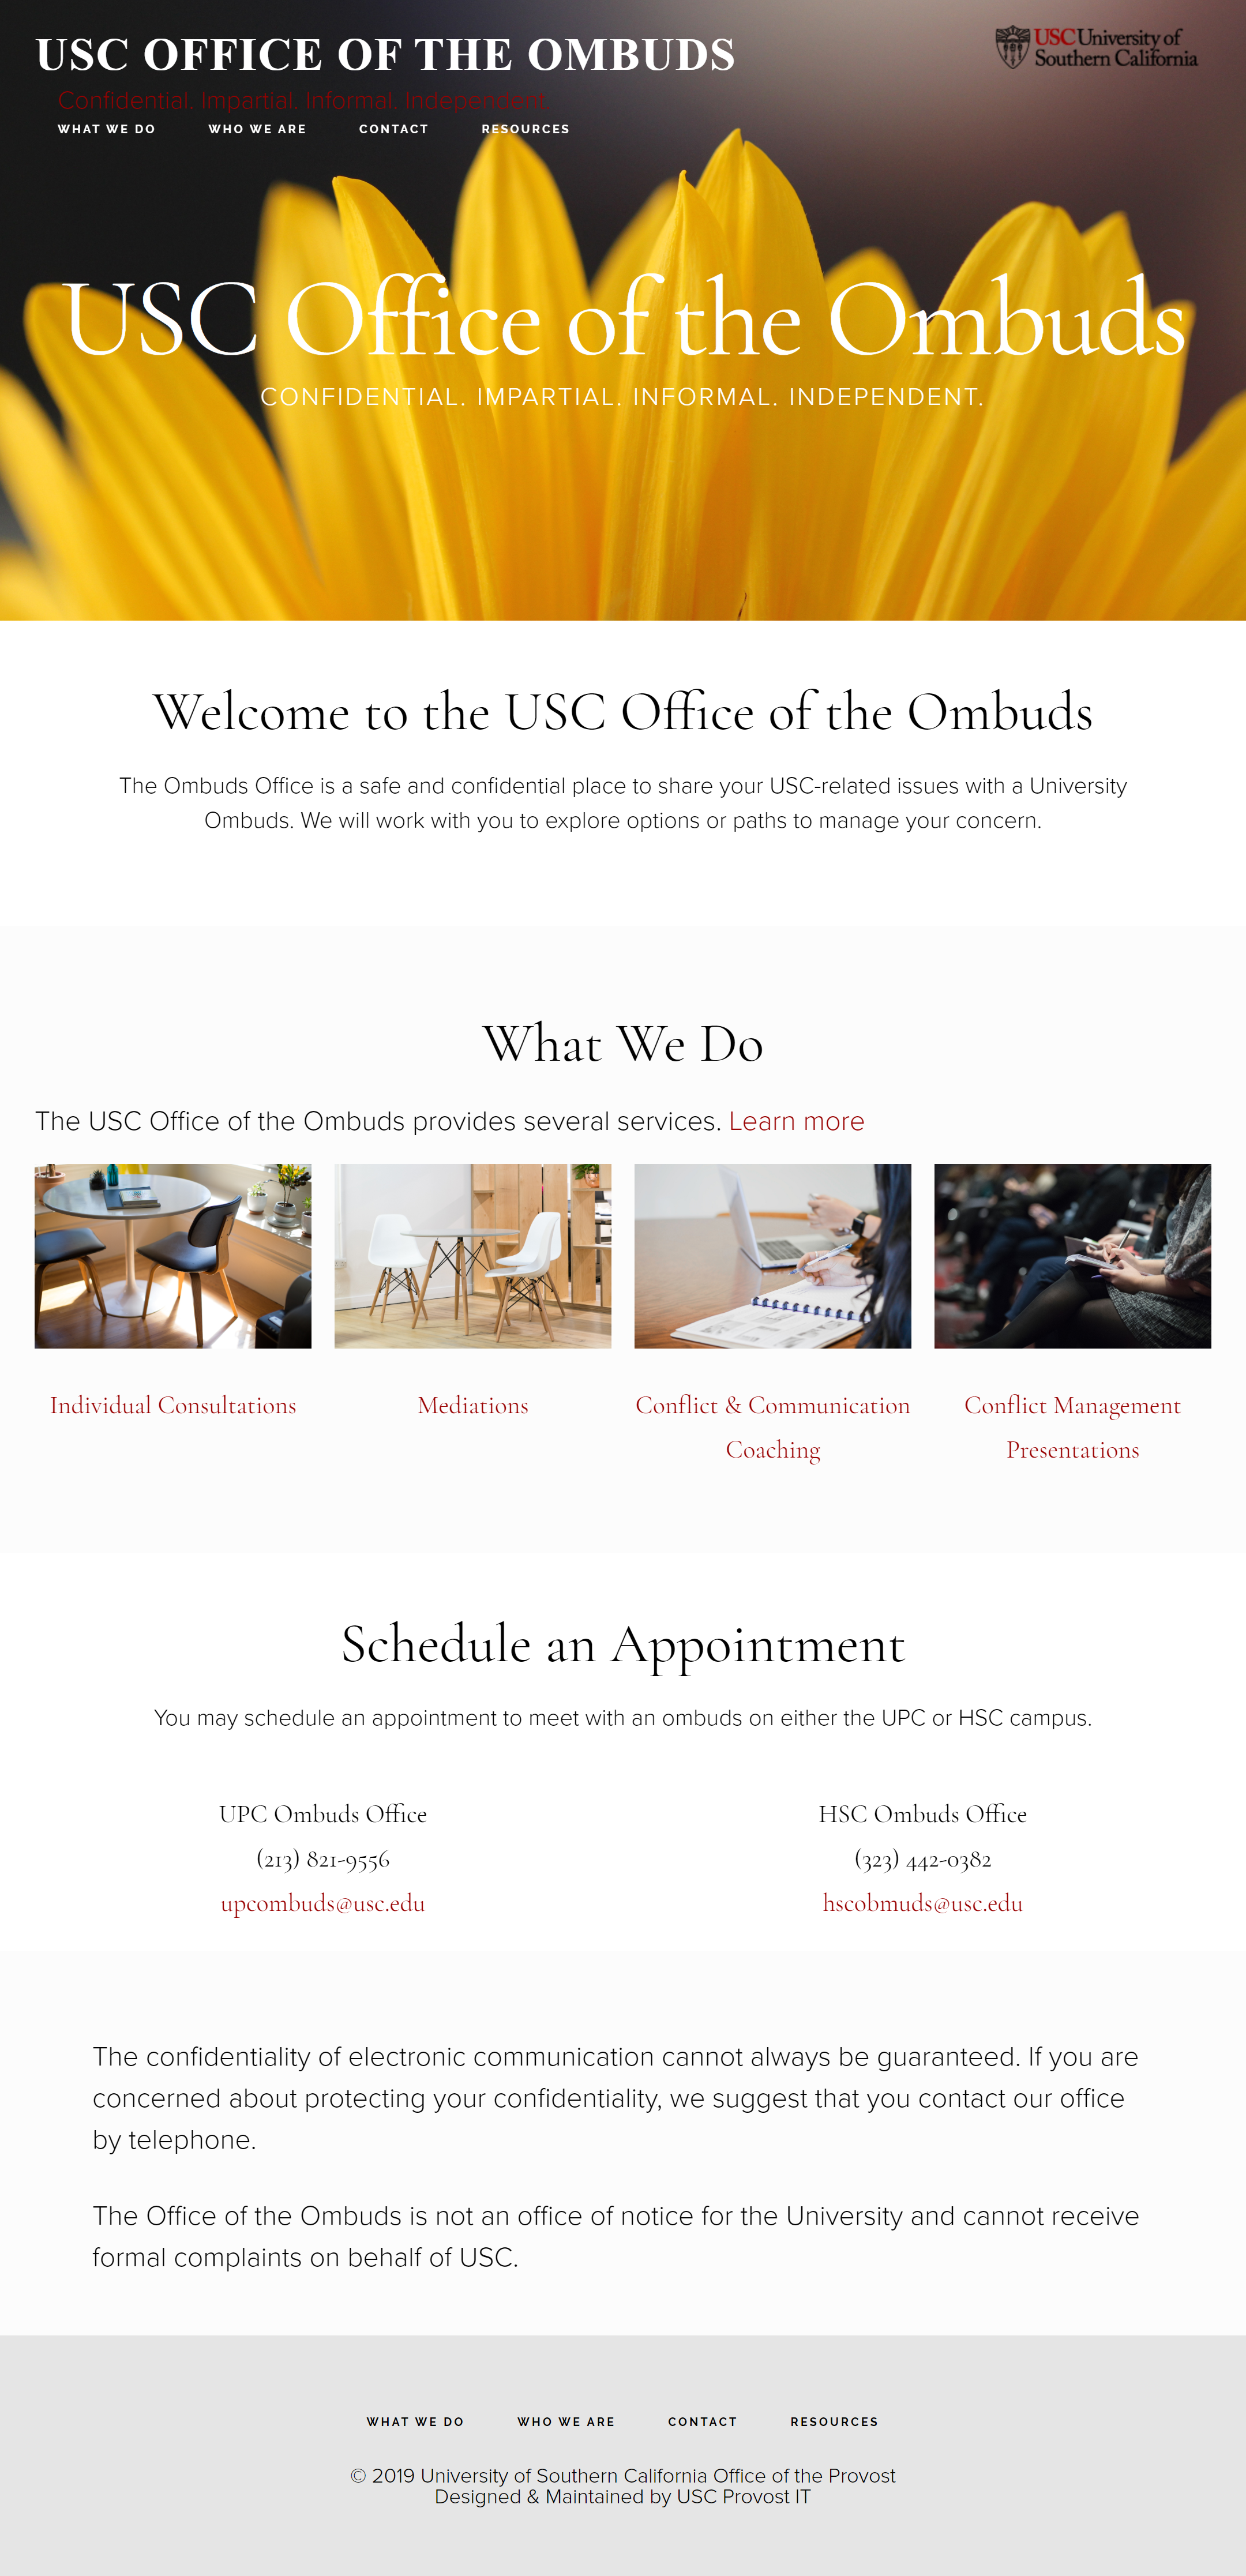 Full size image USC Office of the Ombuds Home Page